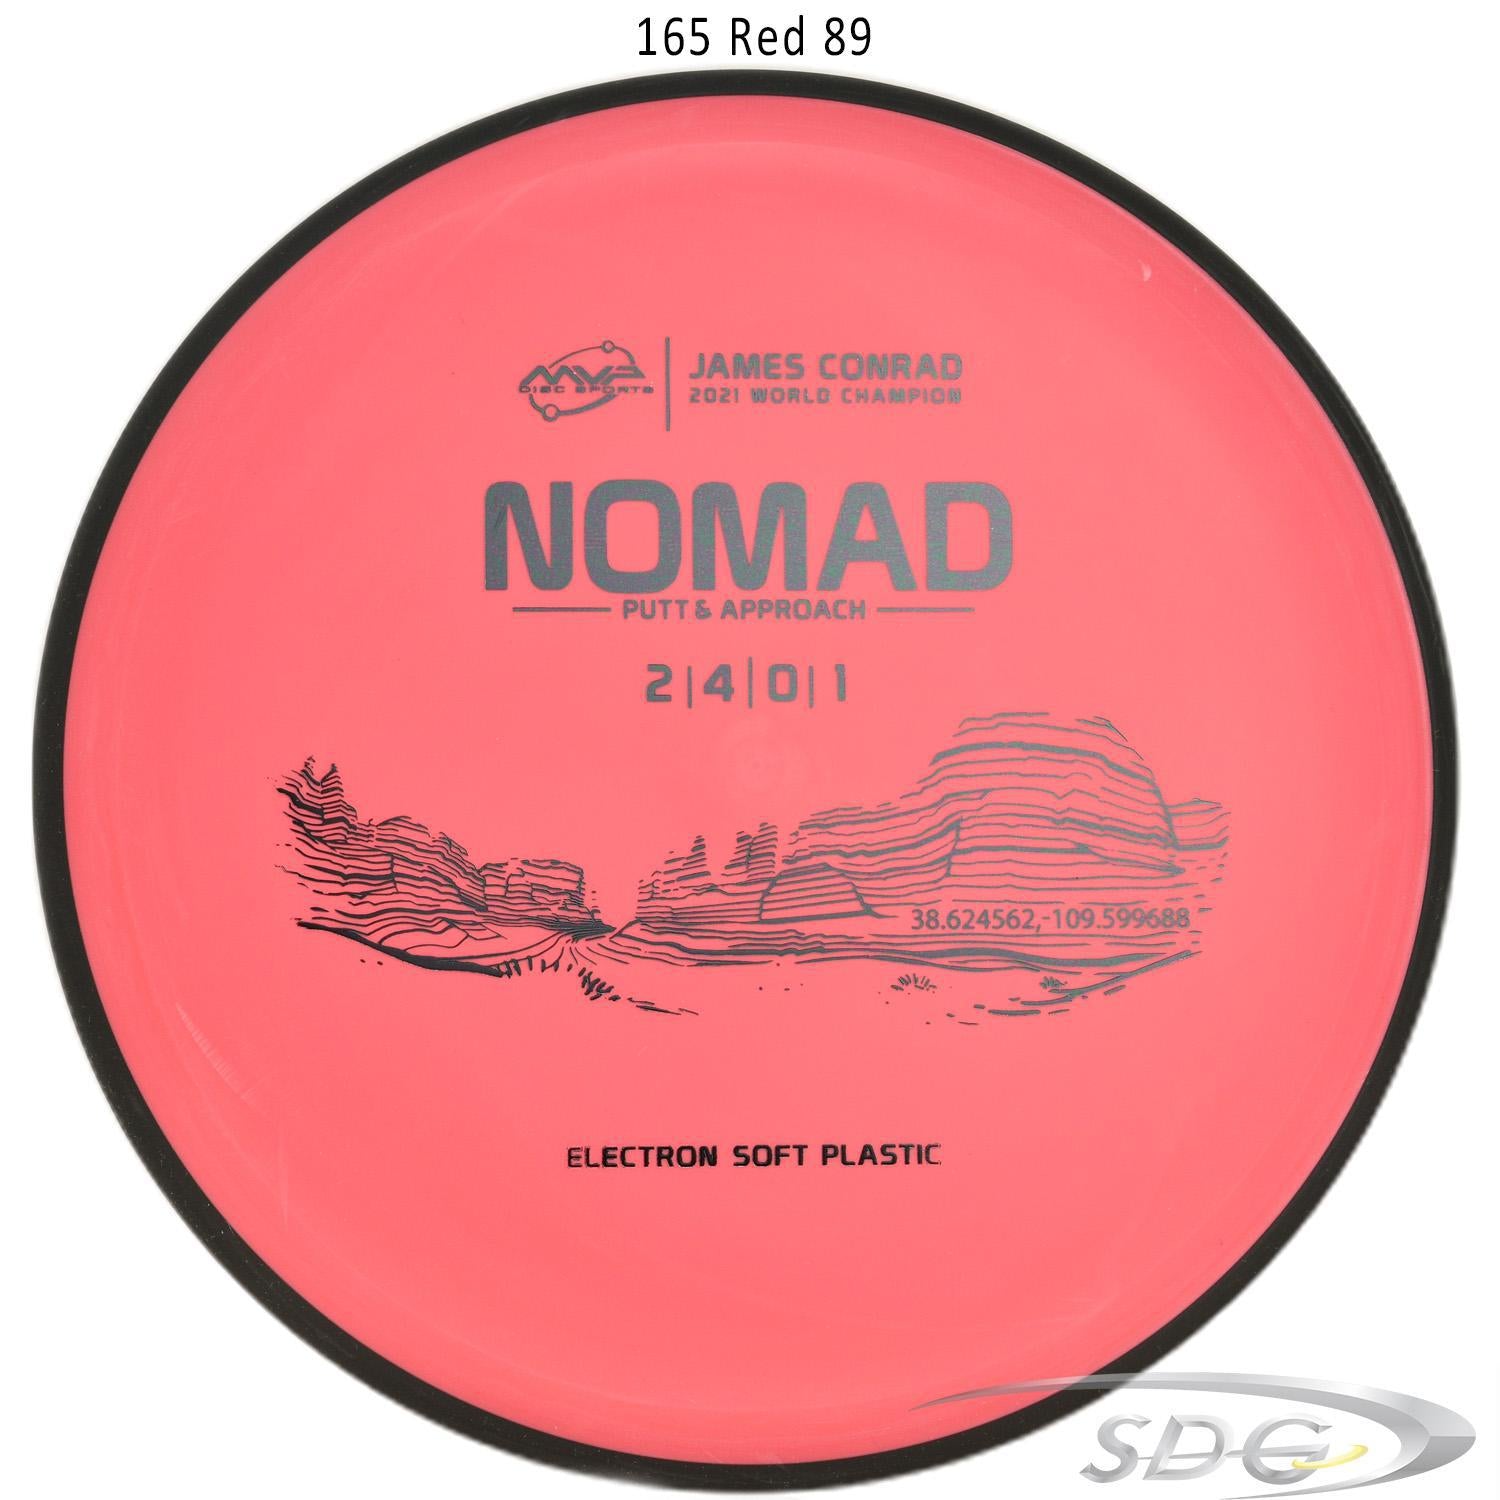 mvp-electron-nomad-soft-james-conrad-edition-disc-golf-putter-1 165 Red 89 